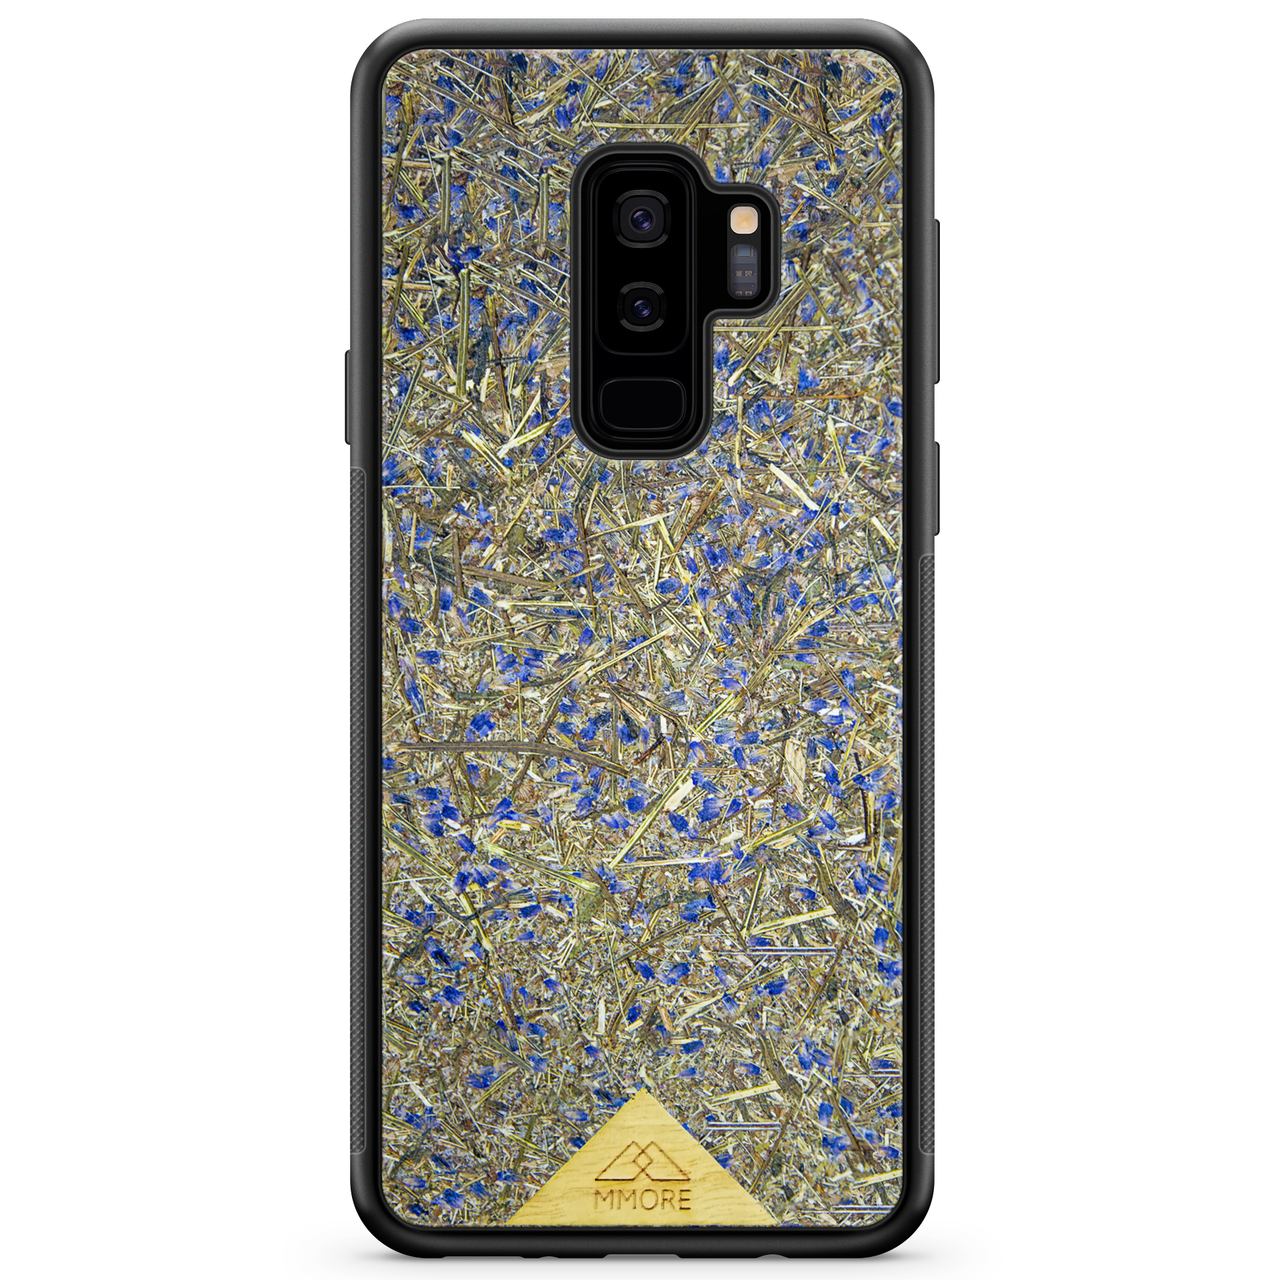 Moment Thin Case for Galaxy Note 20 Ultra - 100% Biodegradable Protective Case